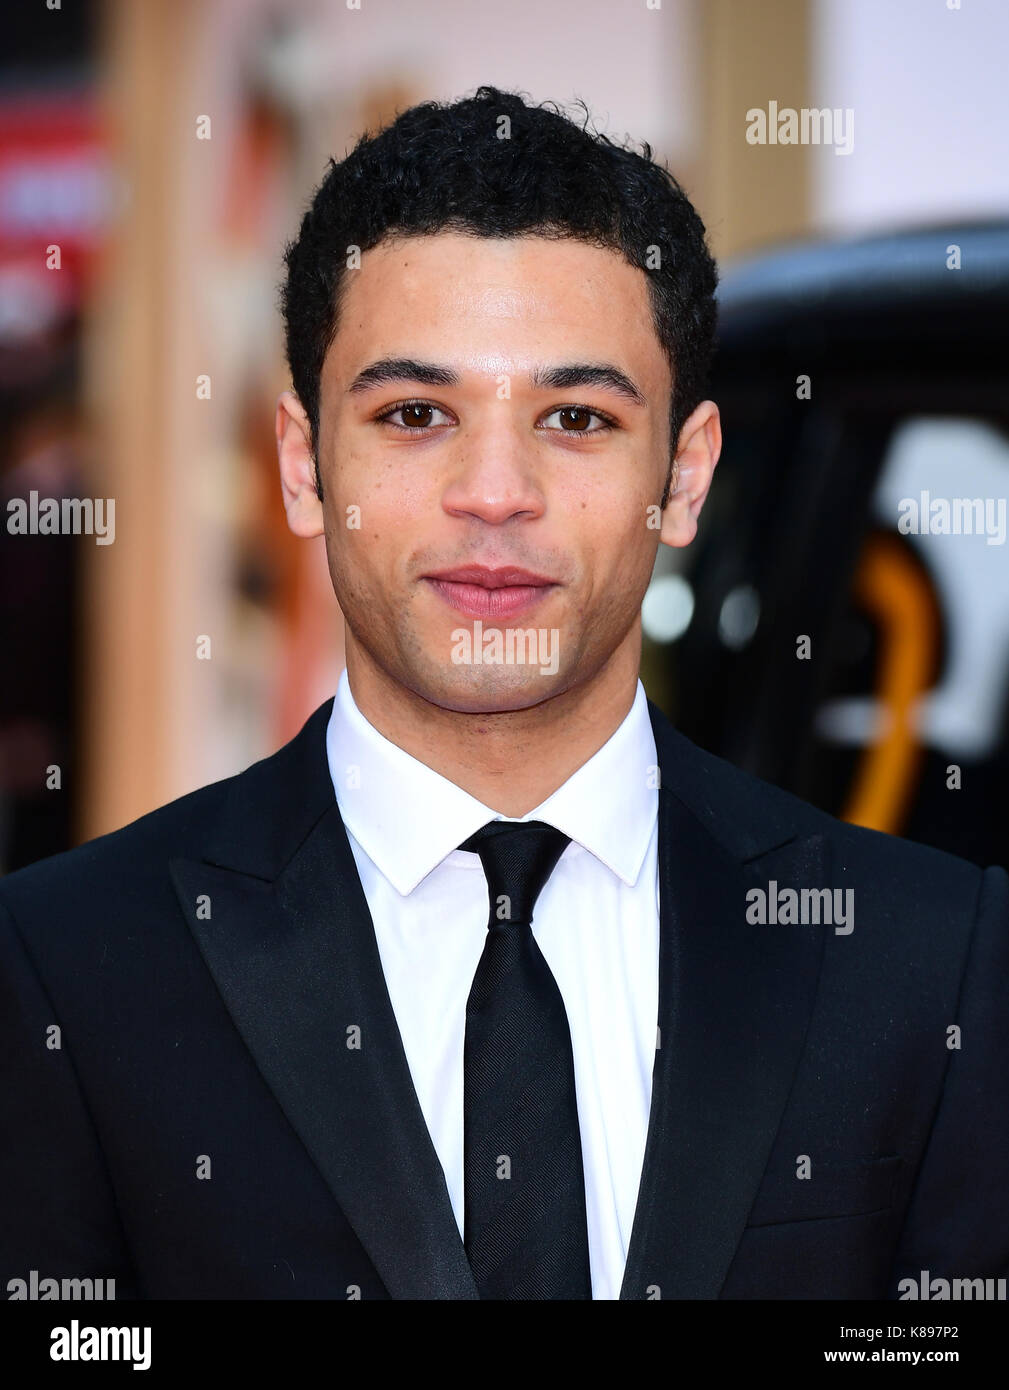 Calvin Demba attending the World Premiere of Kingsman: The Golden Circle, at Cineworld in Leicester Square, London. Picture Date: Monday 18 September. Photo credit should read: Ian West/PA Wire Stock Photo